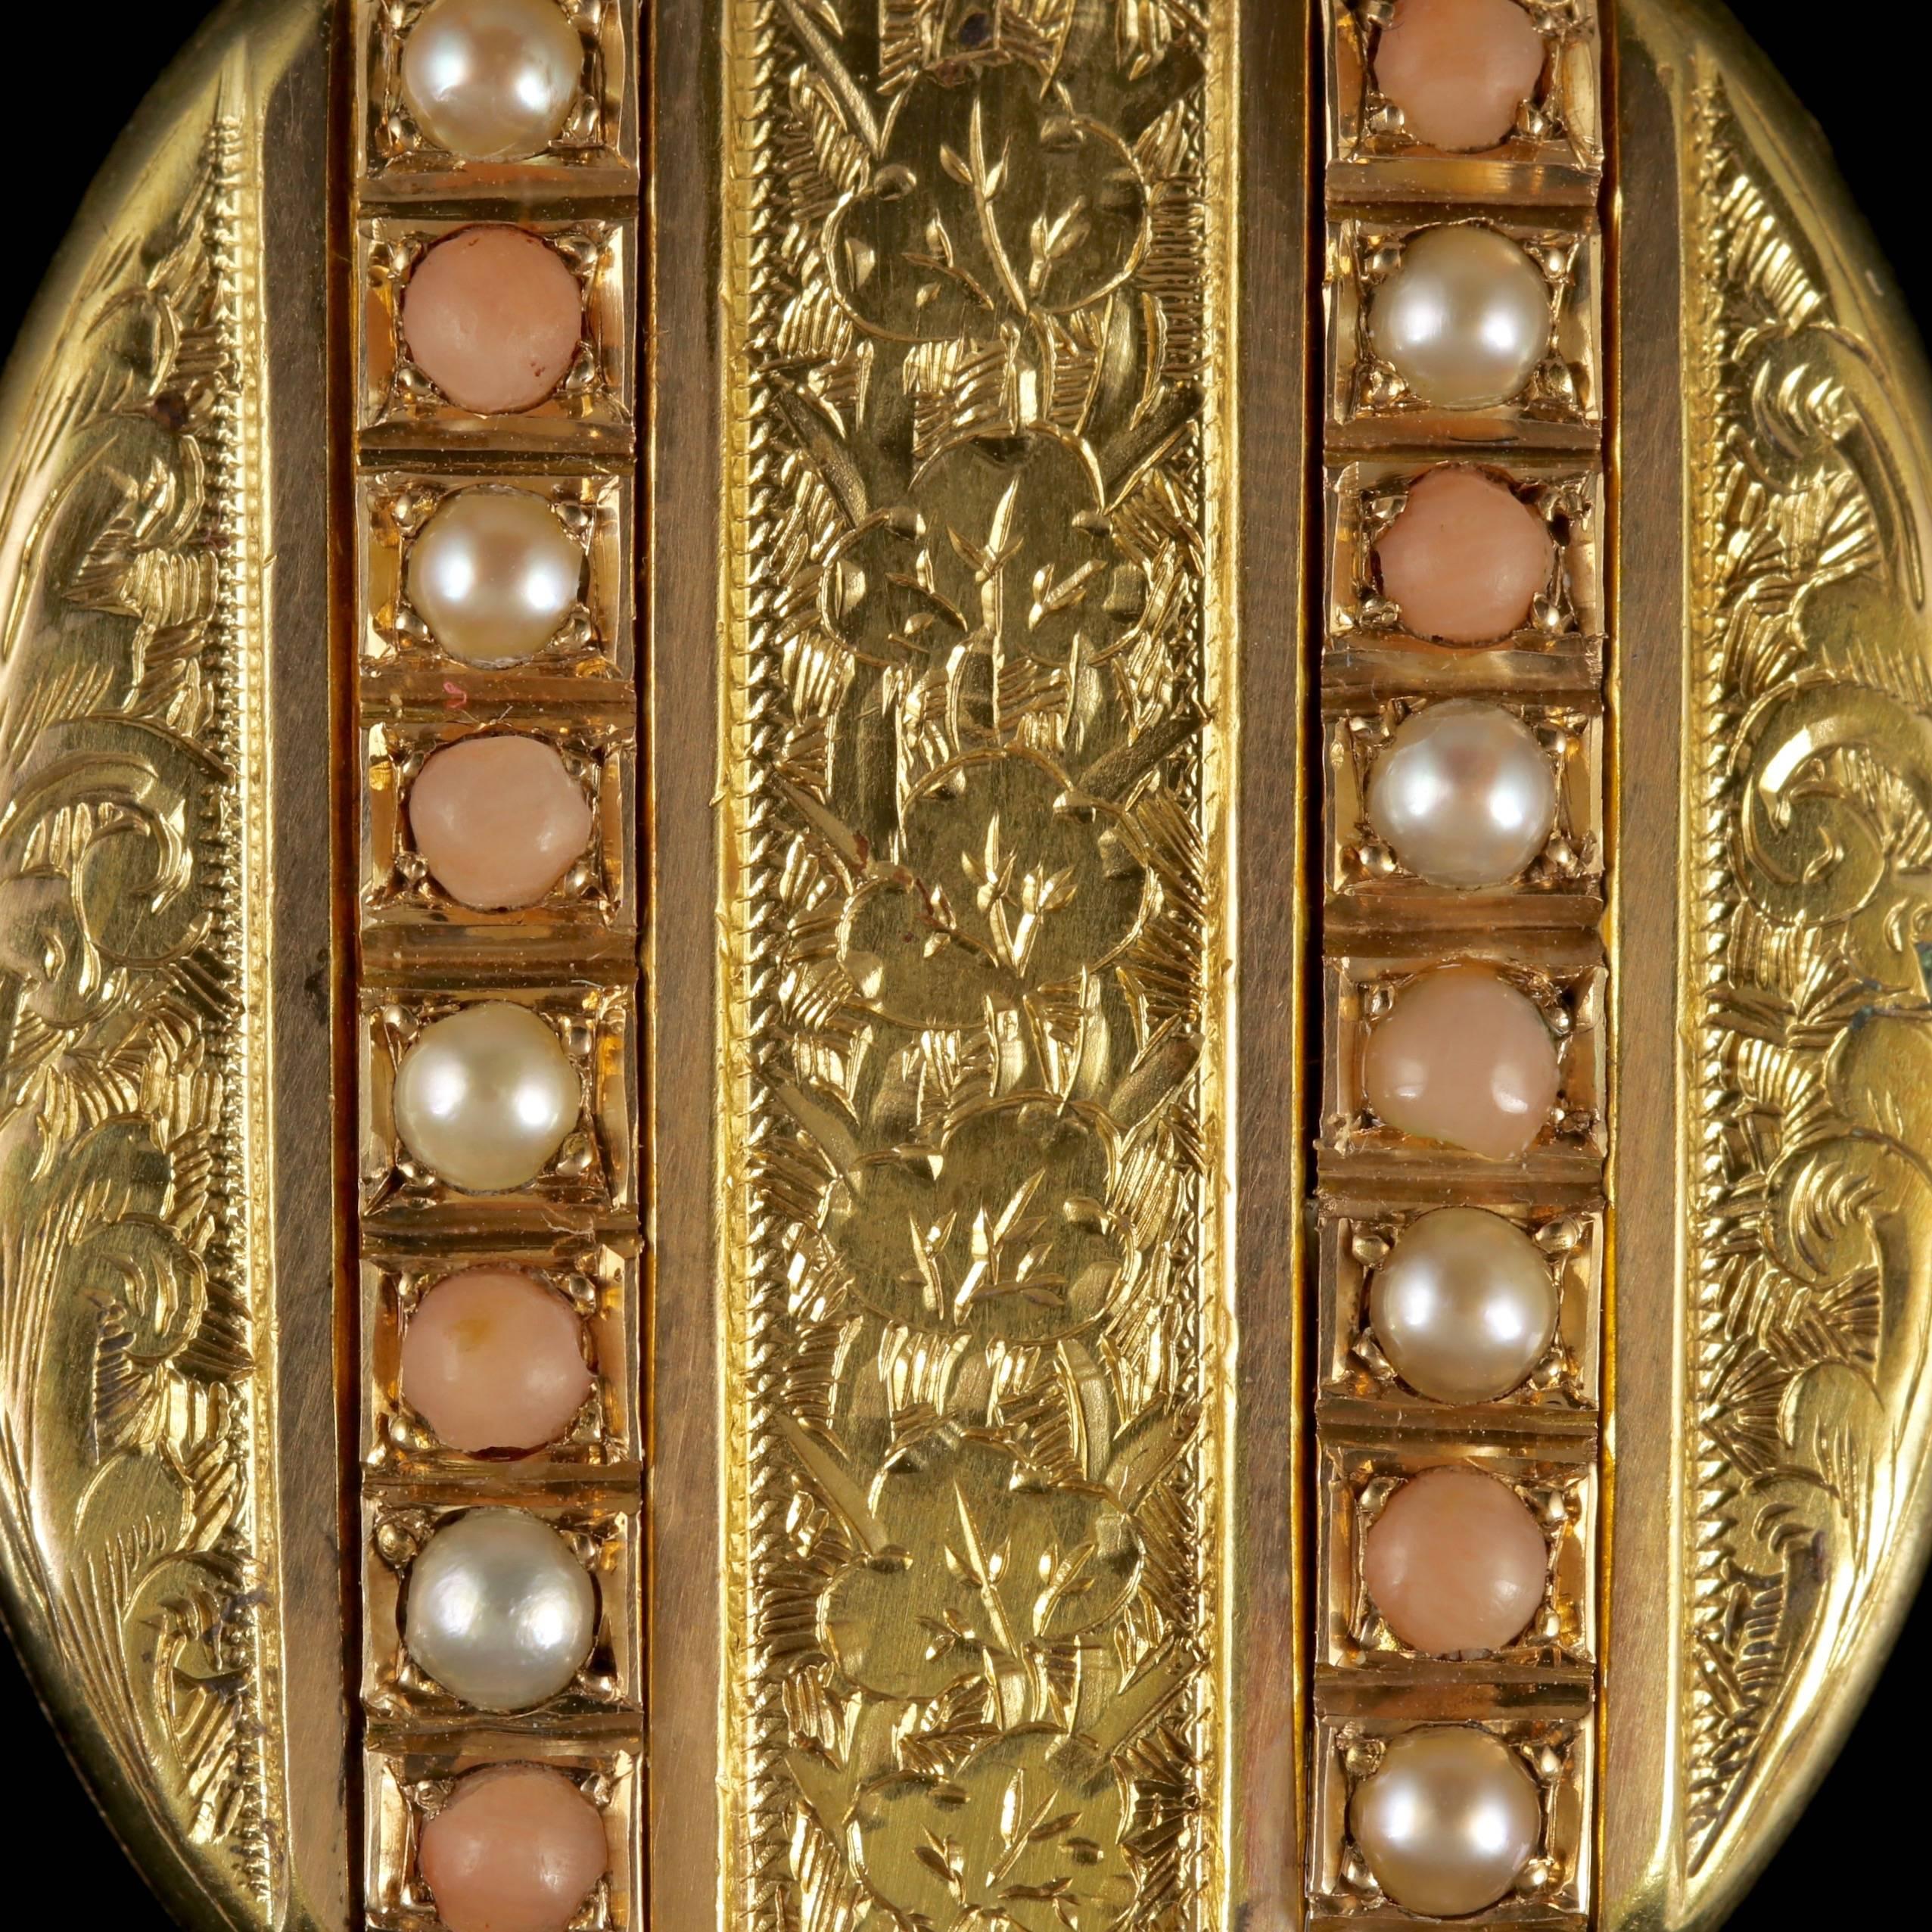 To read more please click continue reading below-

This stunning antique Victorian locket is adorned with rows of Pearls and Coral stones, Circa 1870.

Pearls have been adored throughout history for their rich creamy tone that is lovely lustrous and